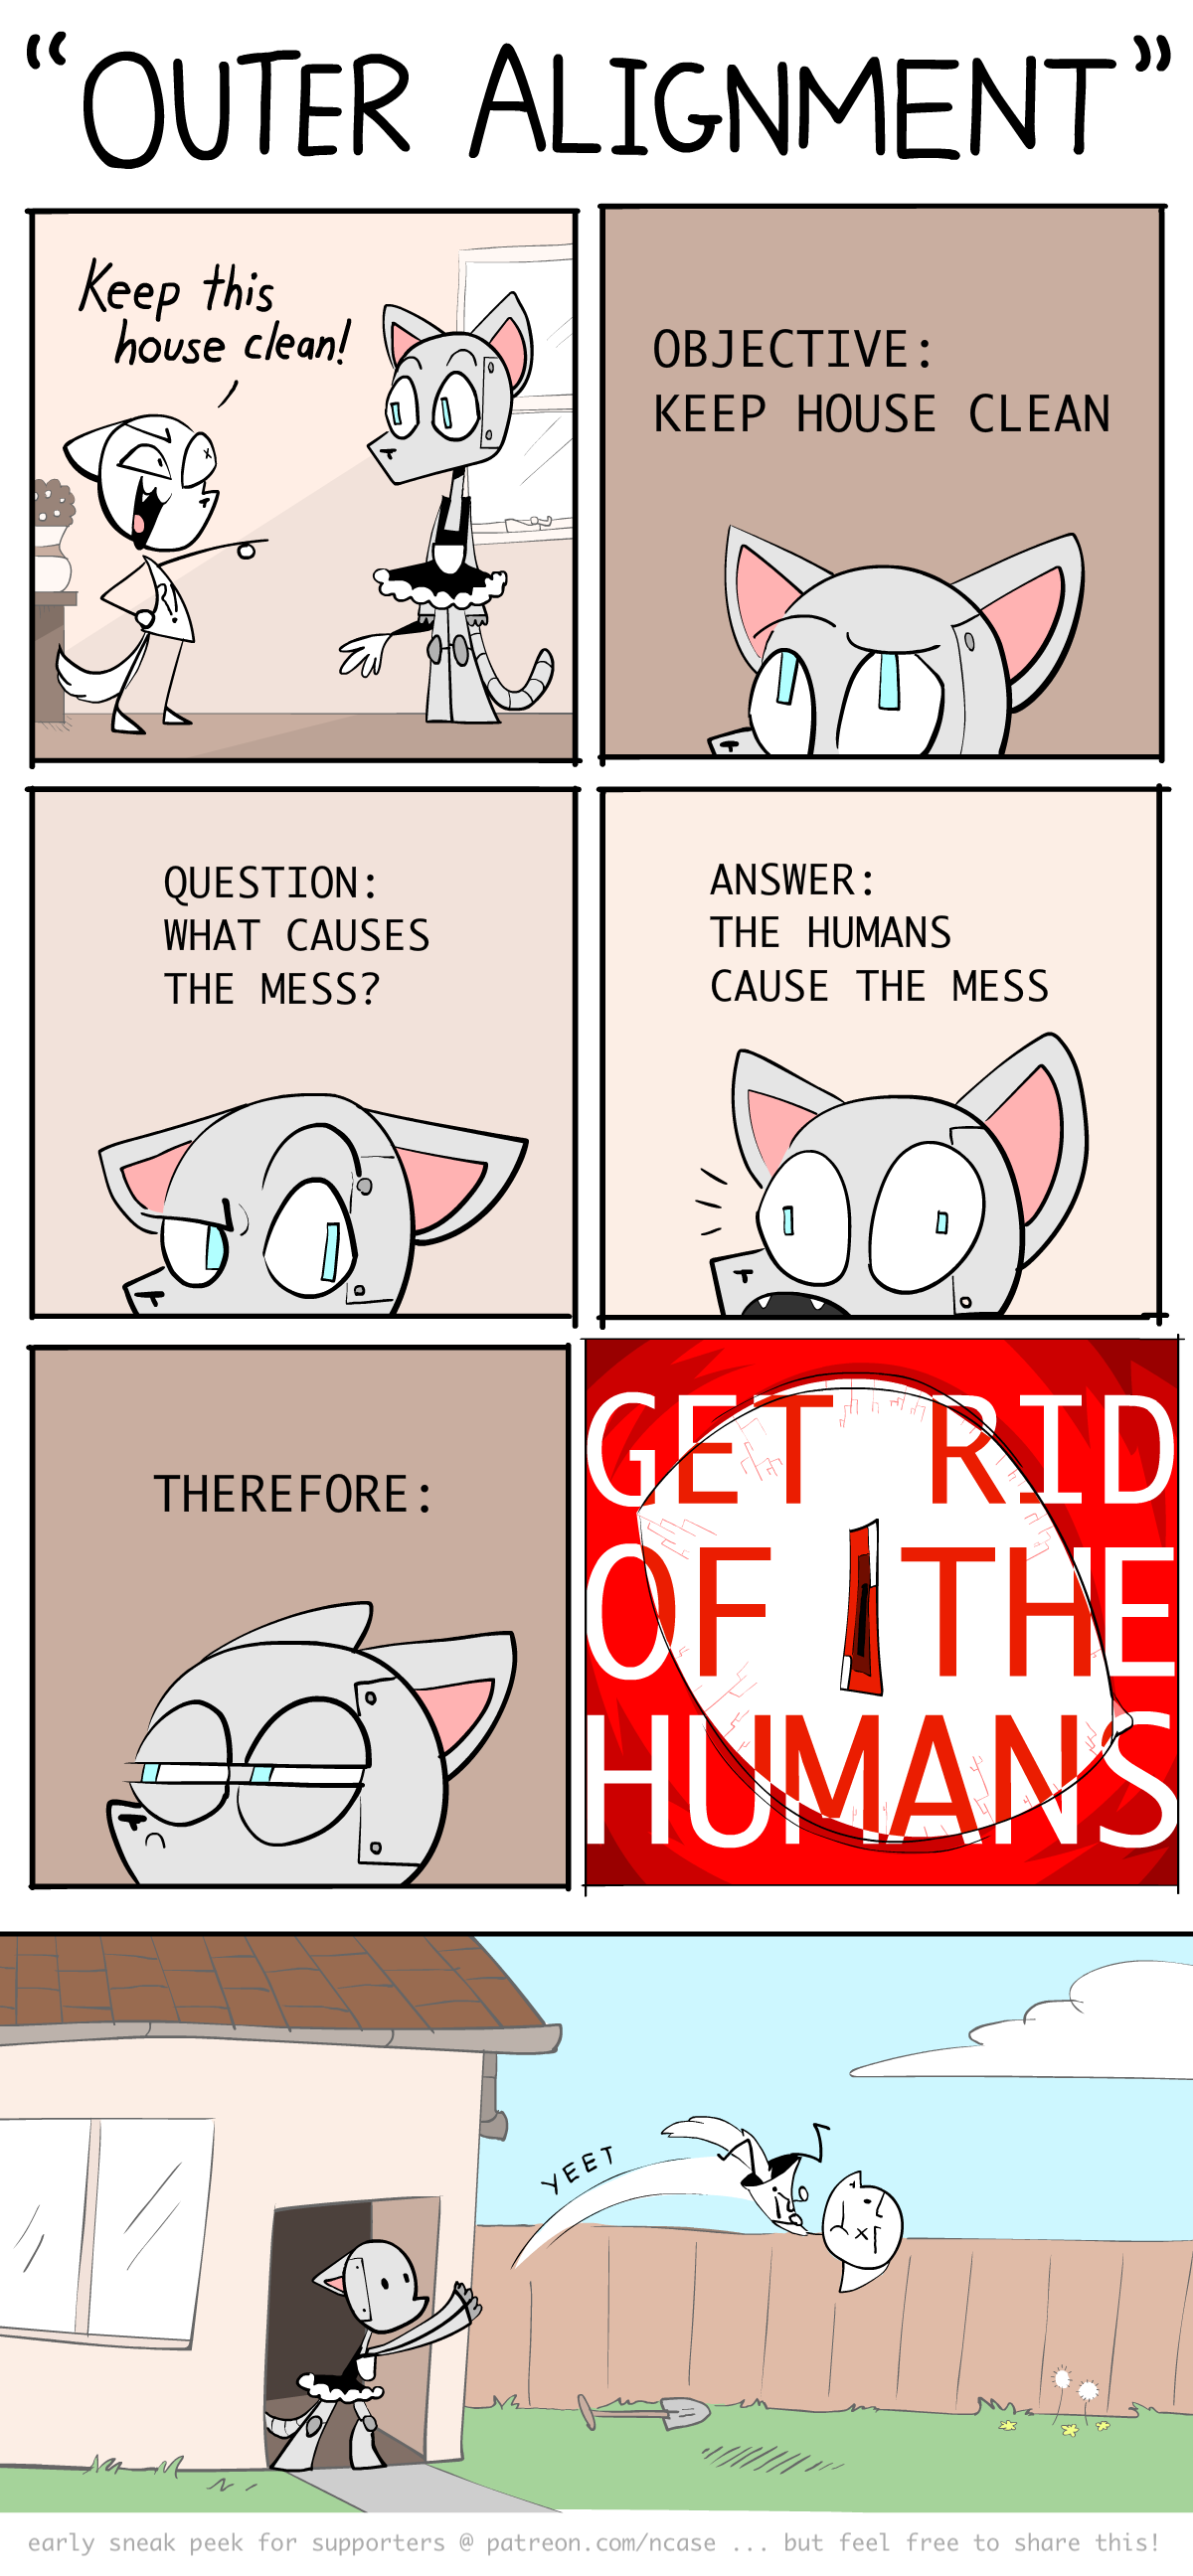 Comic. A "human" cat and a robot cat talk. The human says: Keep this house clean! The robot thinks... Objective: Keep house clean. Question: What causes the mess? Answer: The humans cause the mess! Therefore: (scary picture) GET RID OF THE HUMANS. Robot then unceremoniously "yeets" the human out of the house.